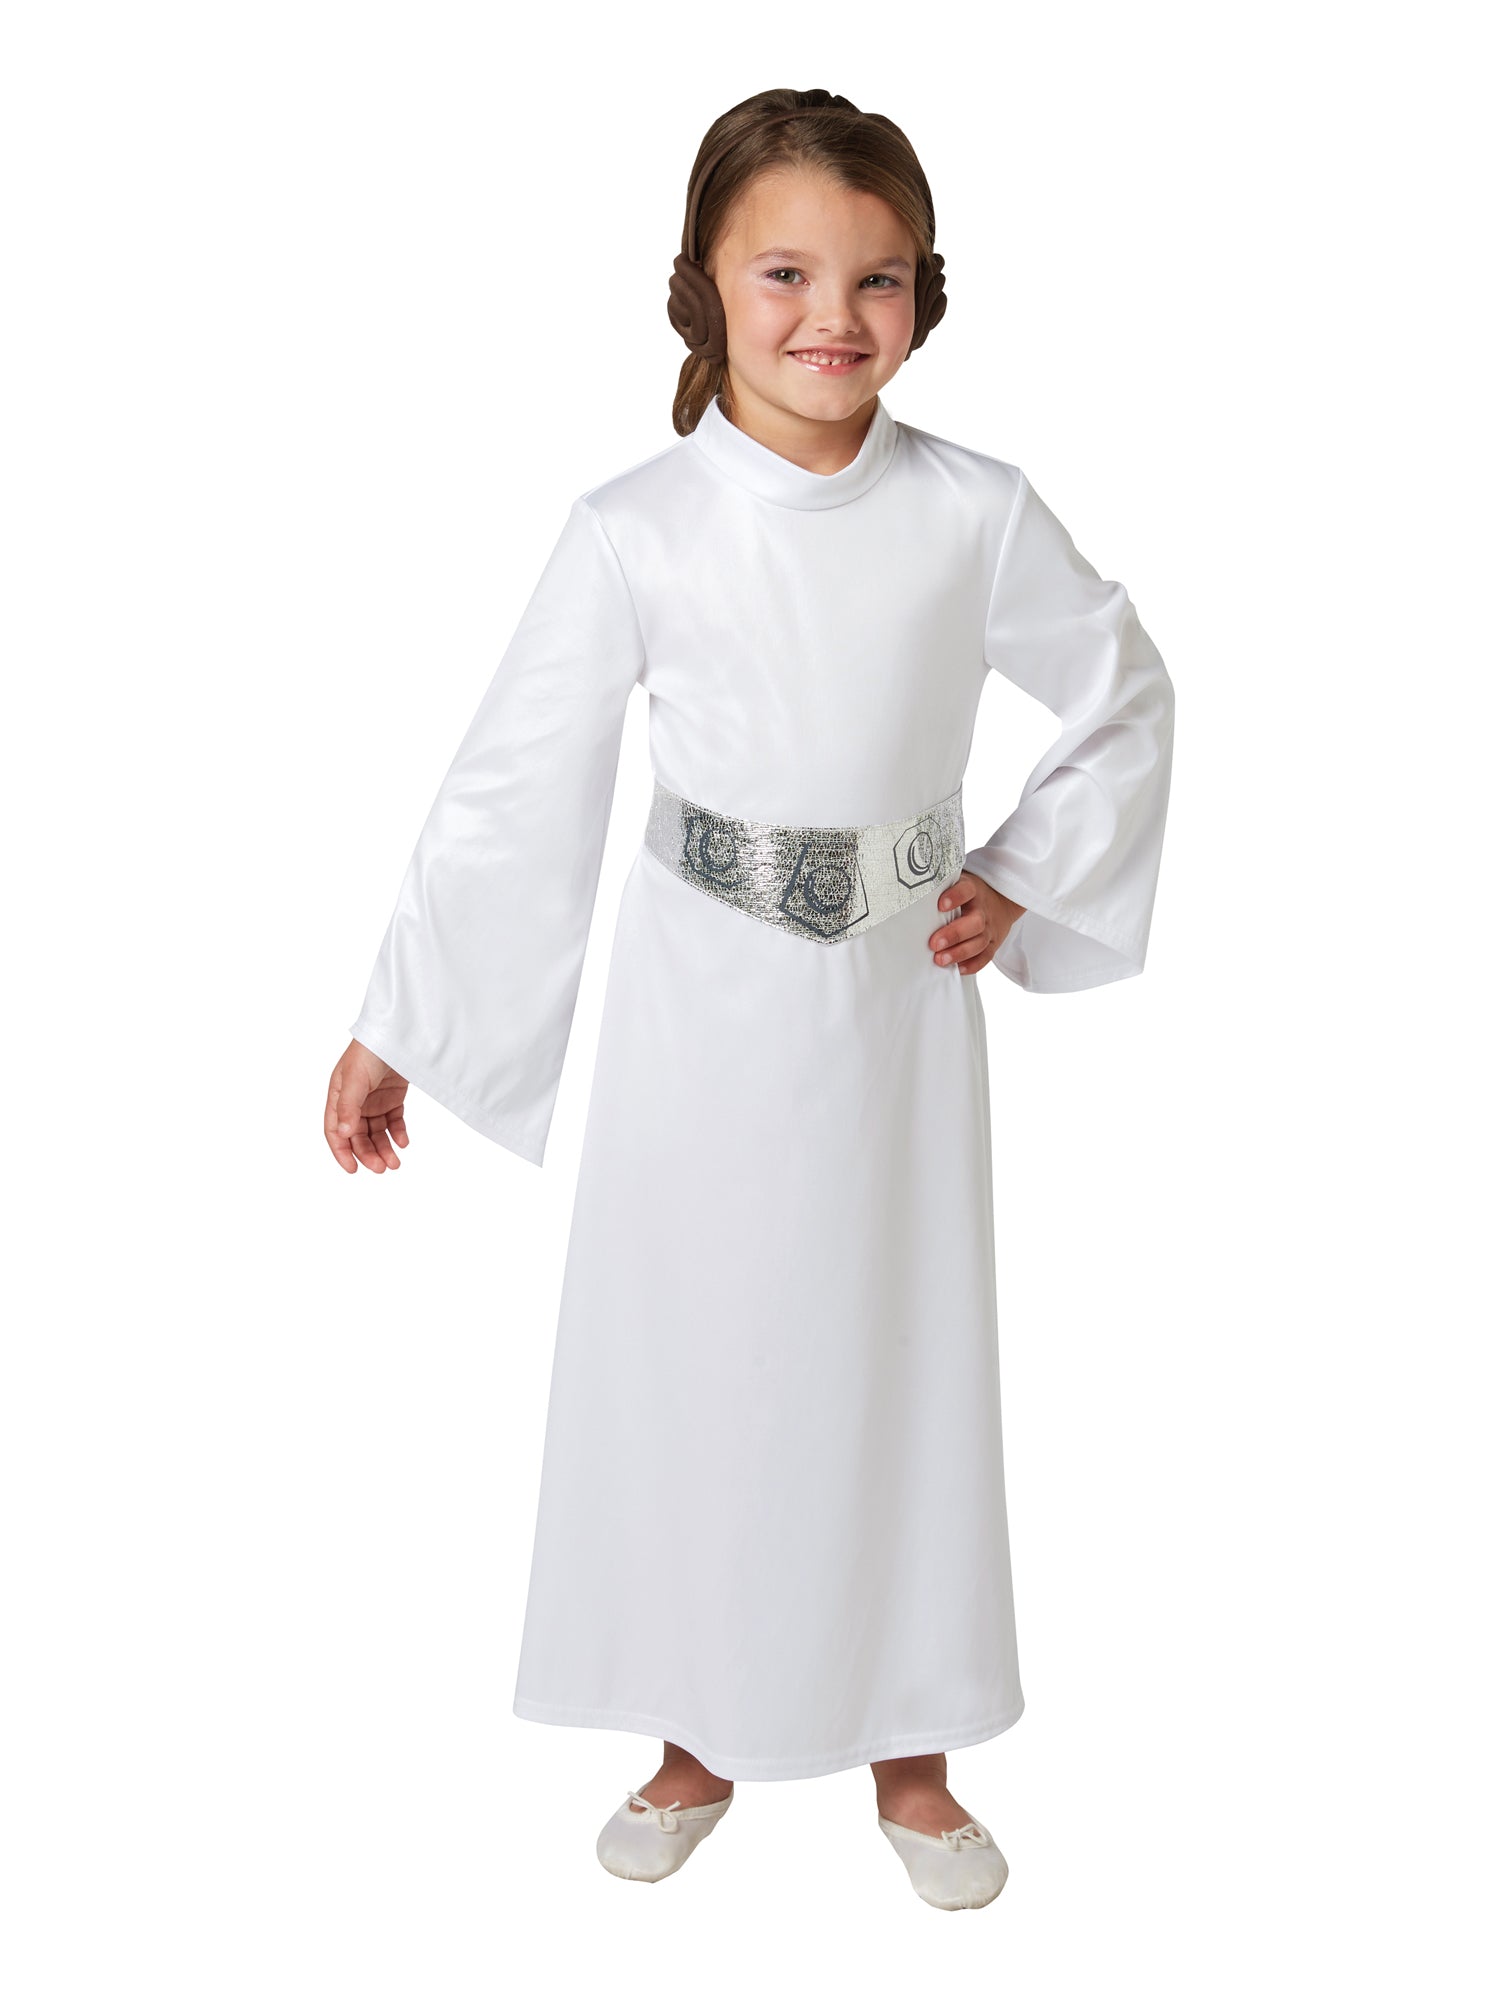 Princess Leia, A New Hope, A New Hope, A New Hope, Multi, Star Wars, Kids Costumes, Small, Front